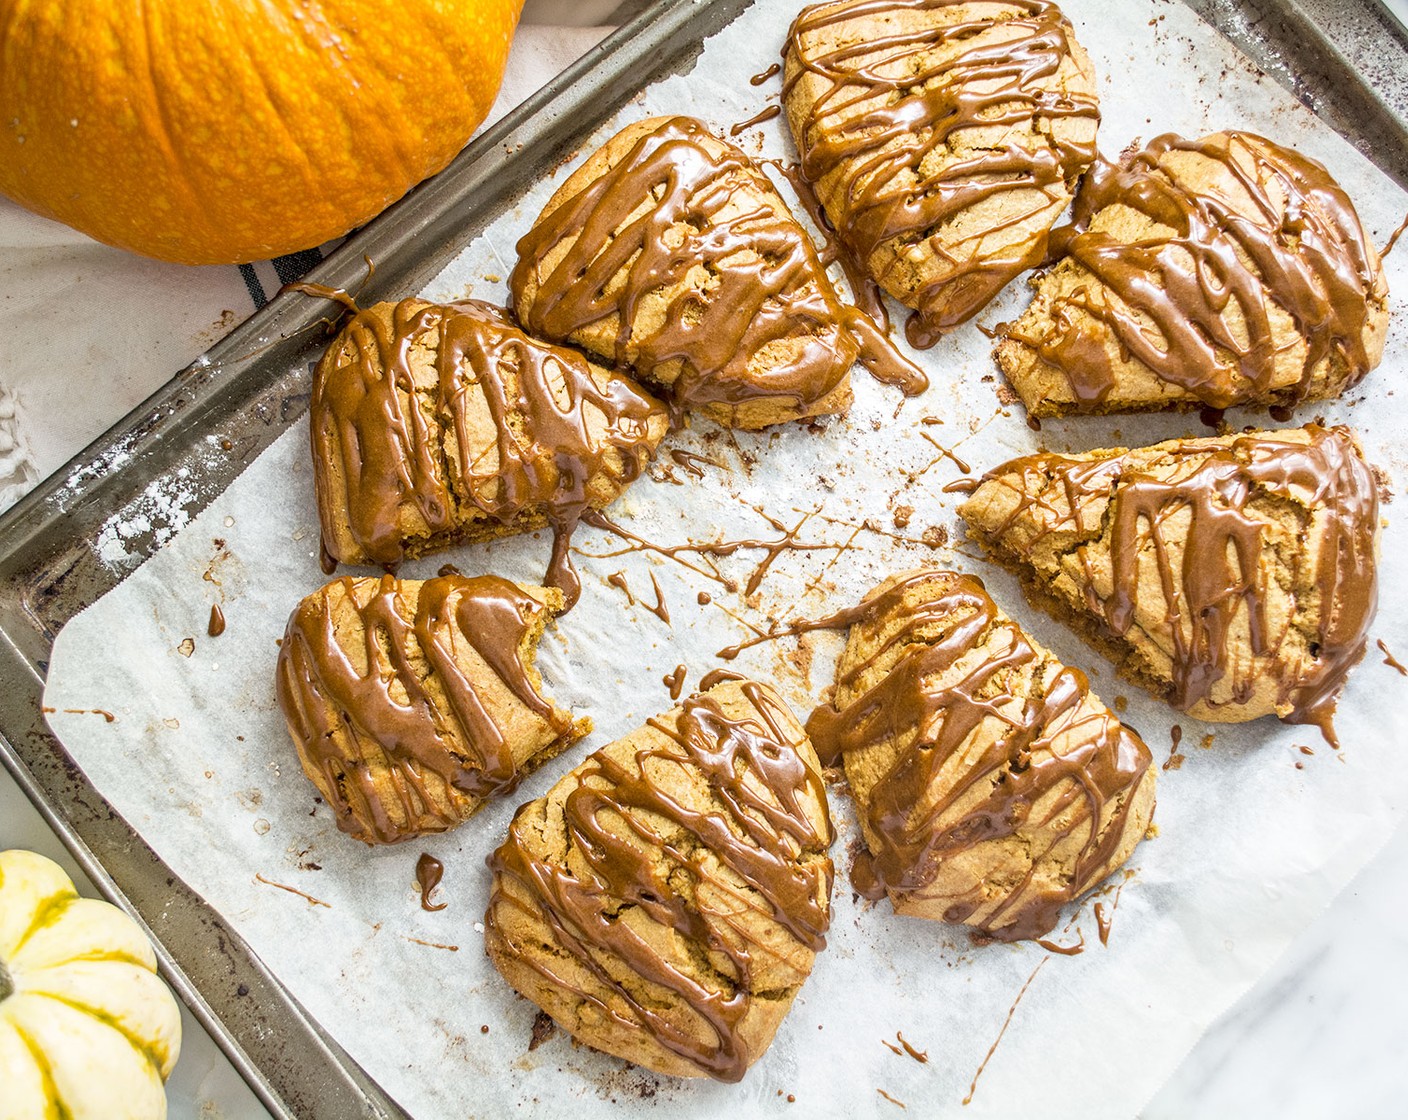 step 12 Once scones are baked and cooled, drizzle each one with the pumpkin glaze and serve fresh!